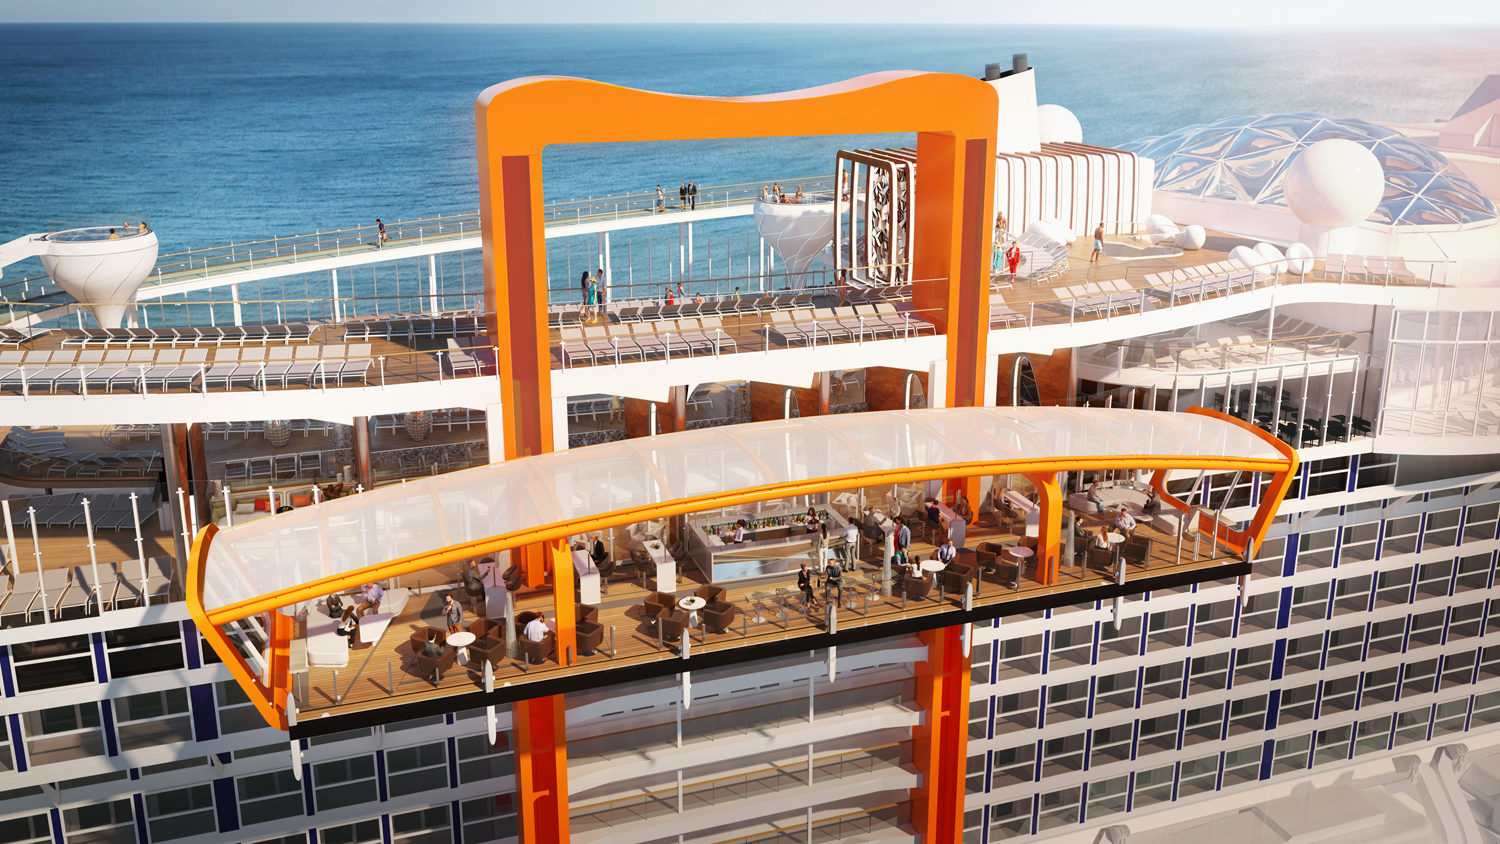 The Magic Carpet on the Celebrity Edge will moves up and down the ship’s 16 decks to deliver different experiences at each one.